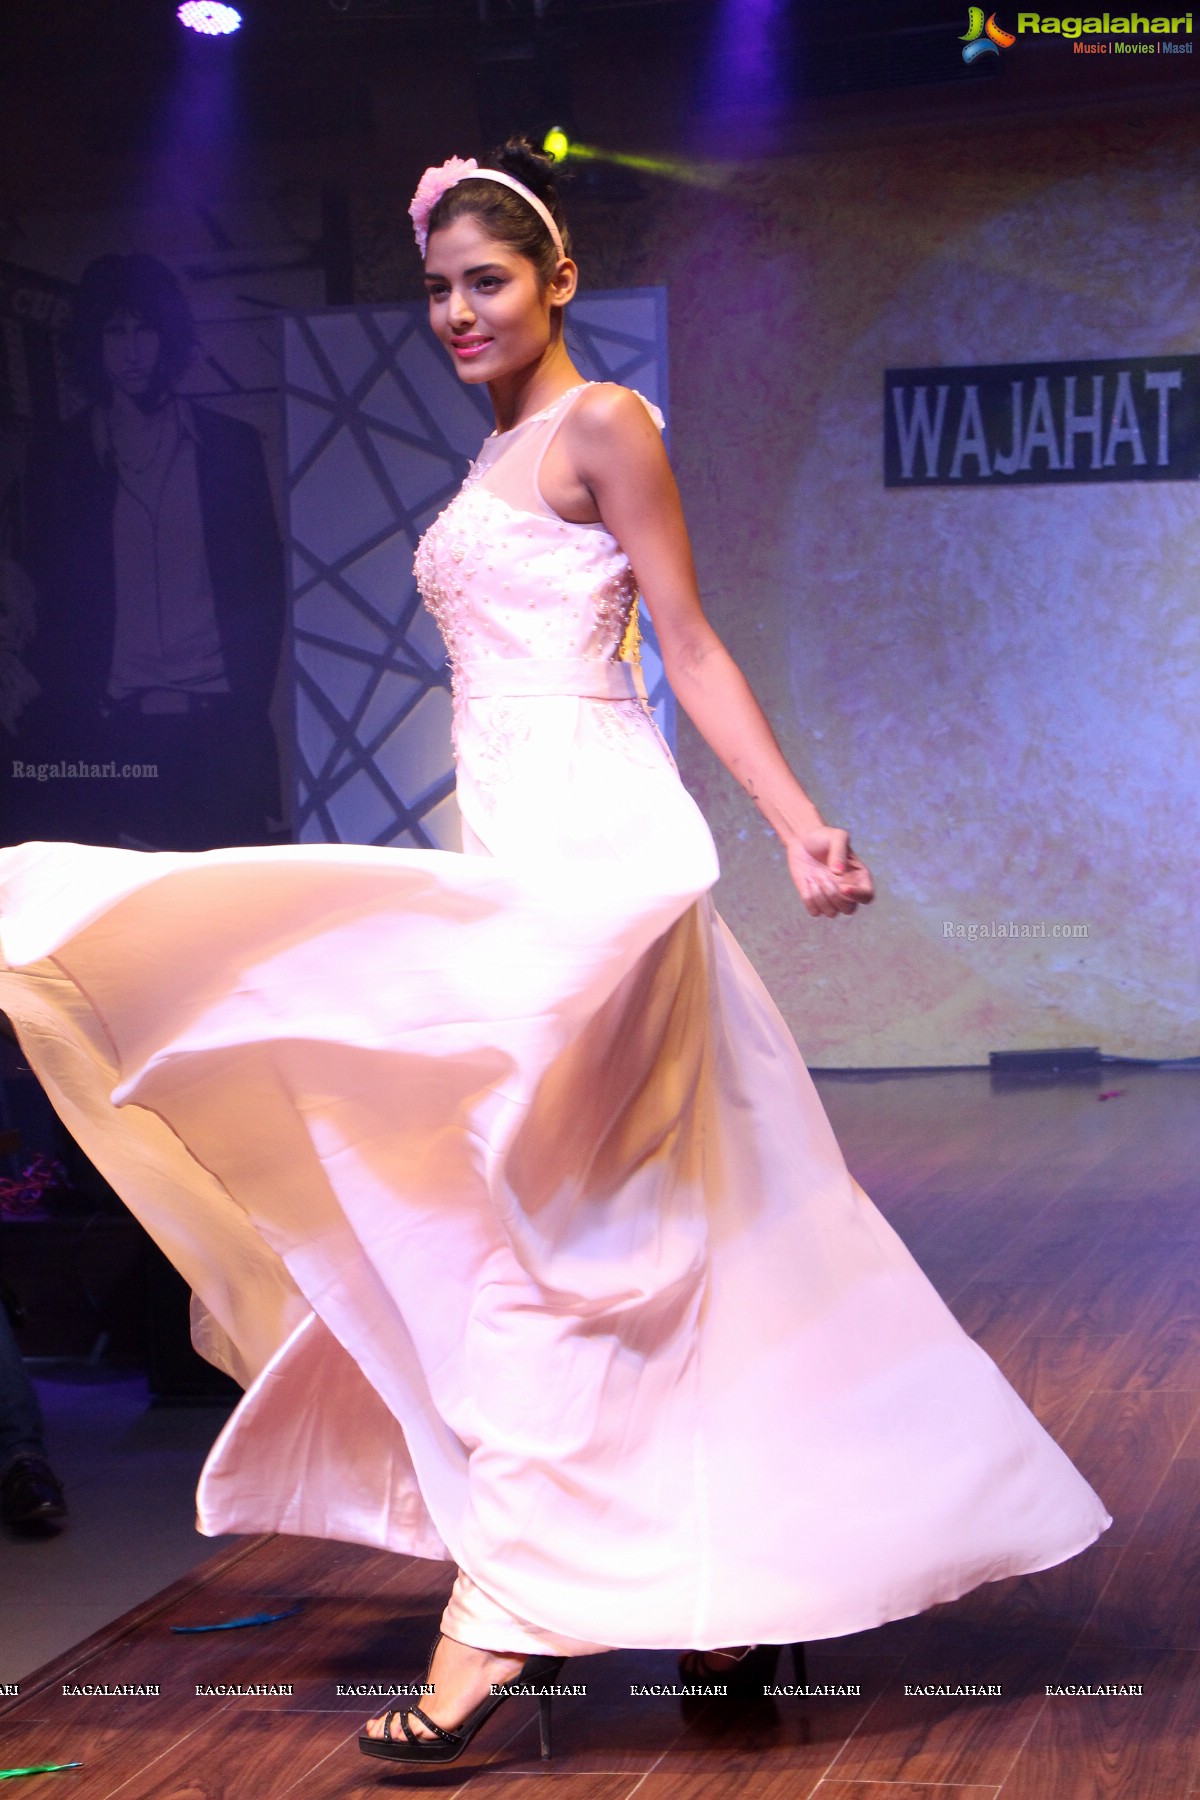 Fashion Fridays at Heart Cup Coffee - Showcase of Imperial Romance by Wajahat Mirza